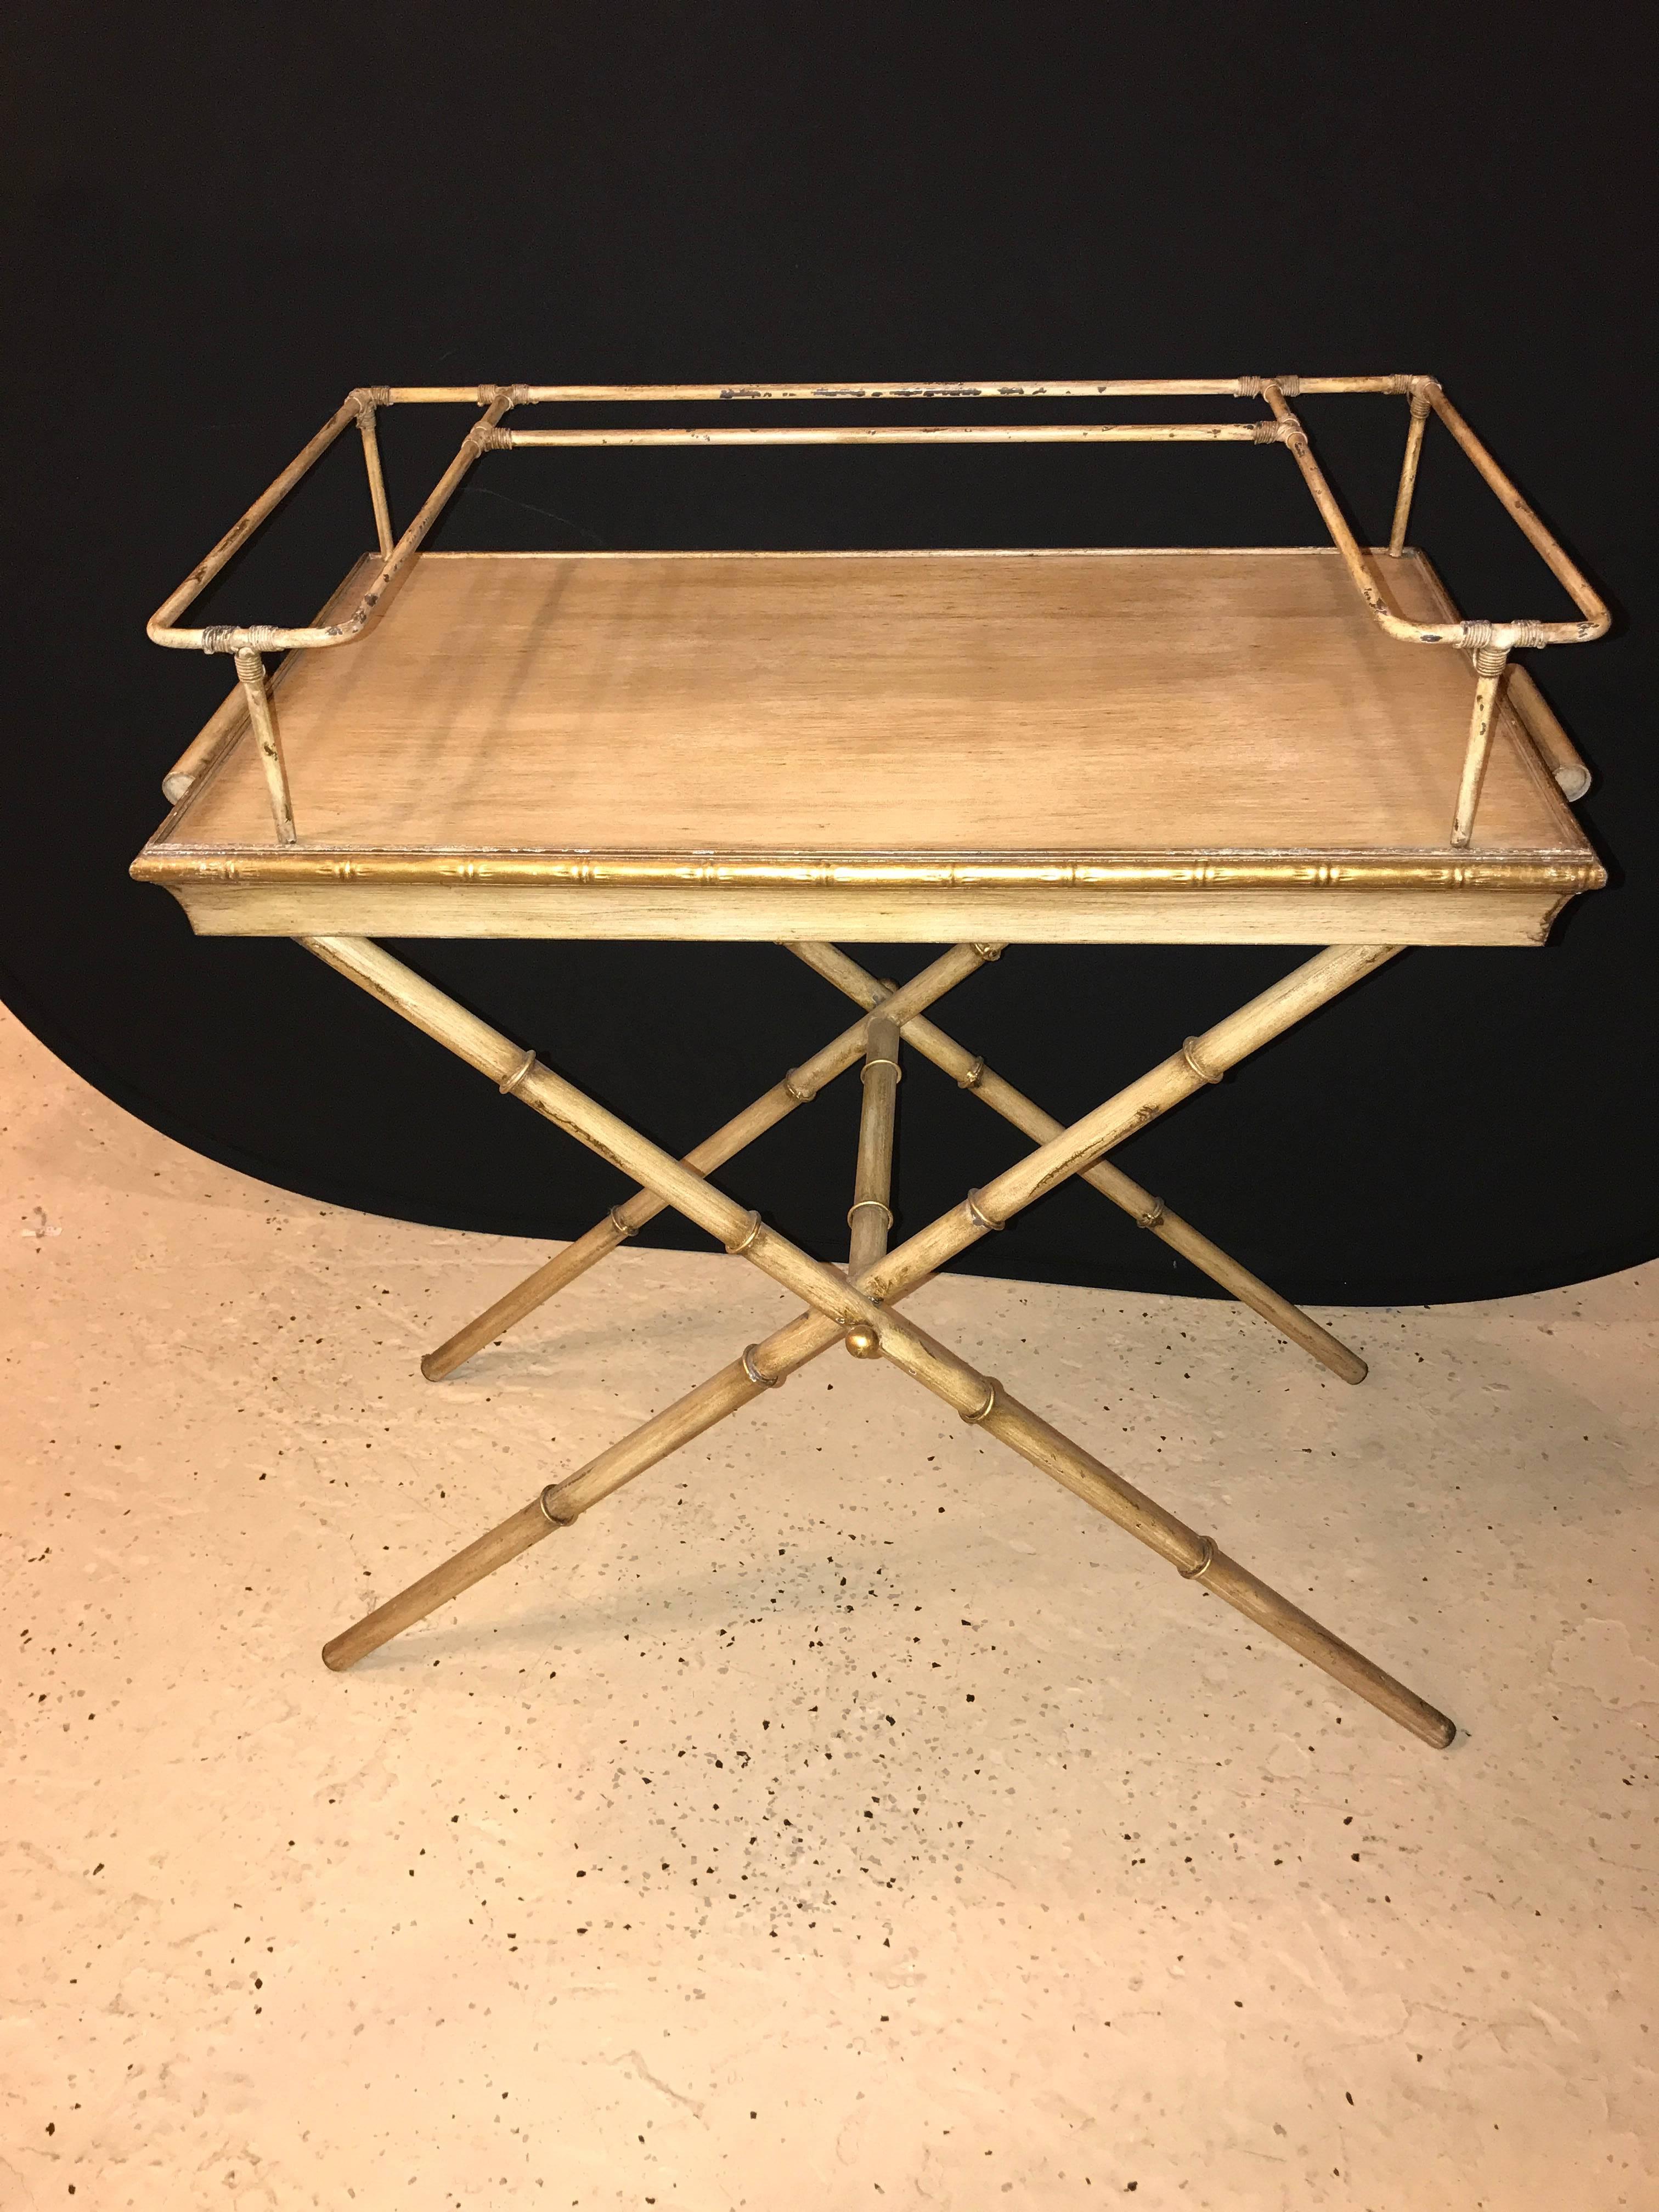 Indoor outdoor bamboo form serving tray on stand. Screaming poolside come this distressed bamboo form folding stand with removable twin handled tray top.